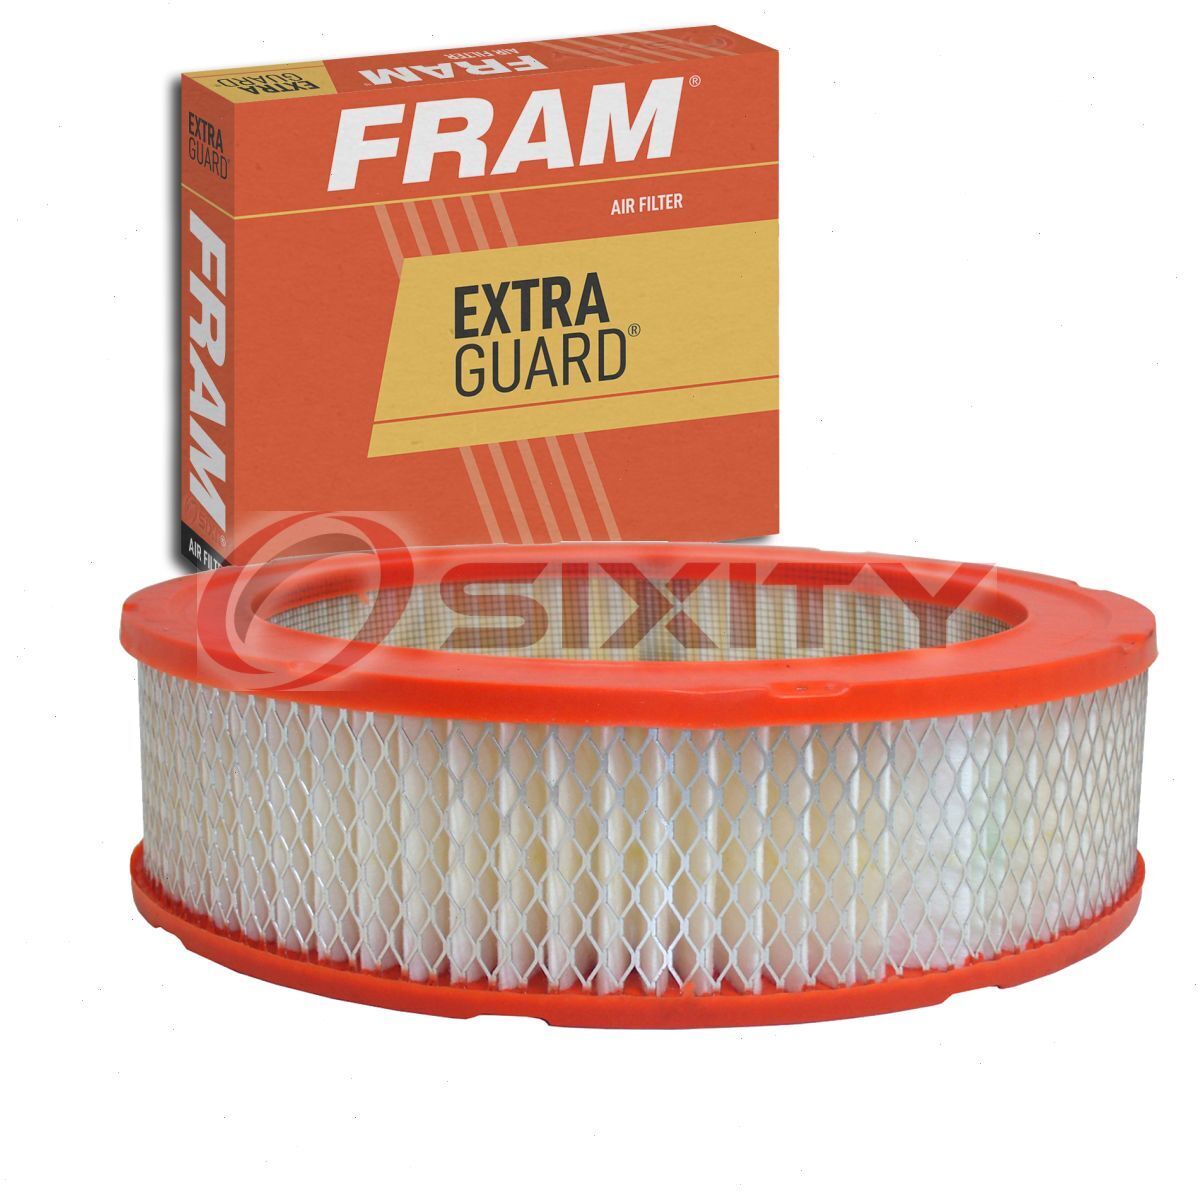 FRAM Extra Guard Air Filter for 1950-1976 Dodge Coronet Intake Inlet od